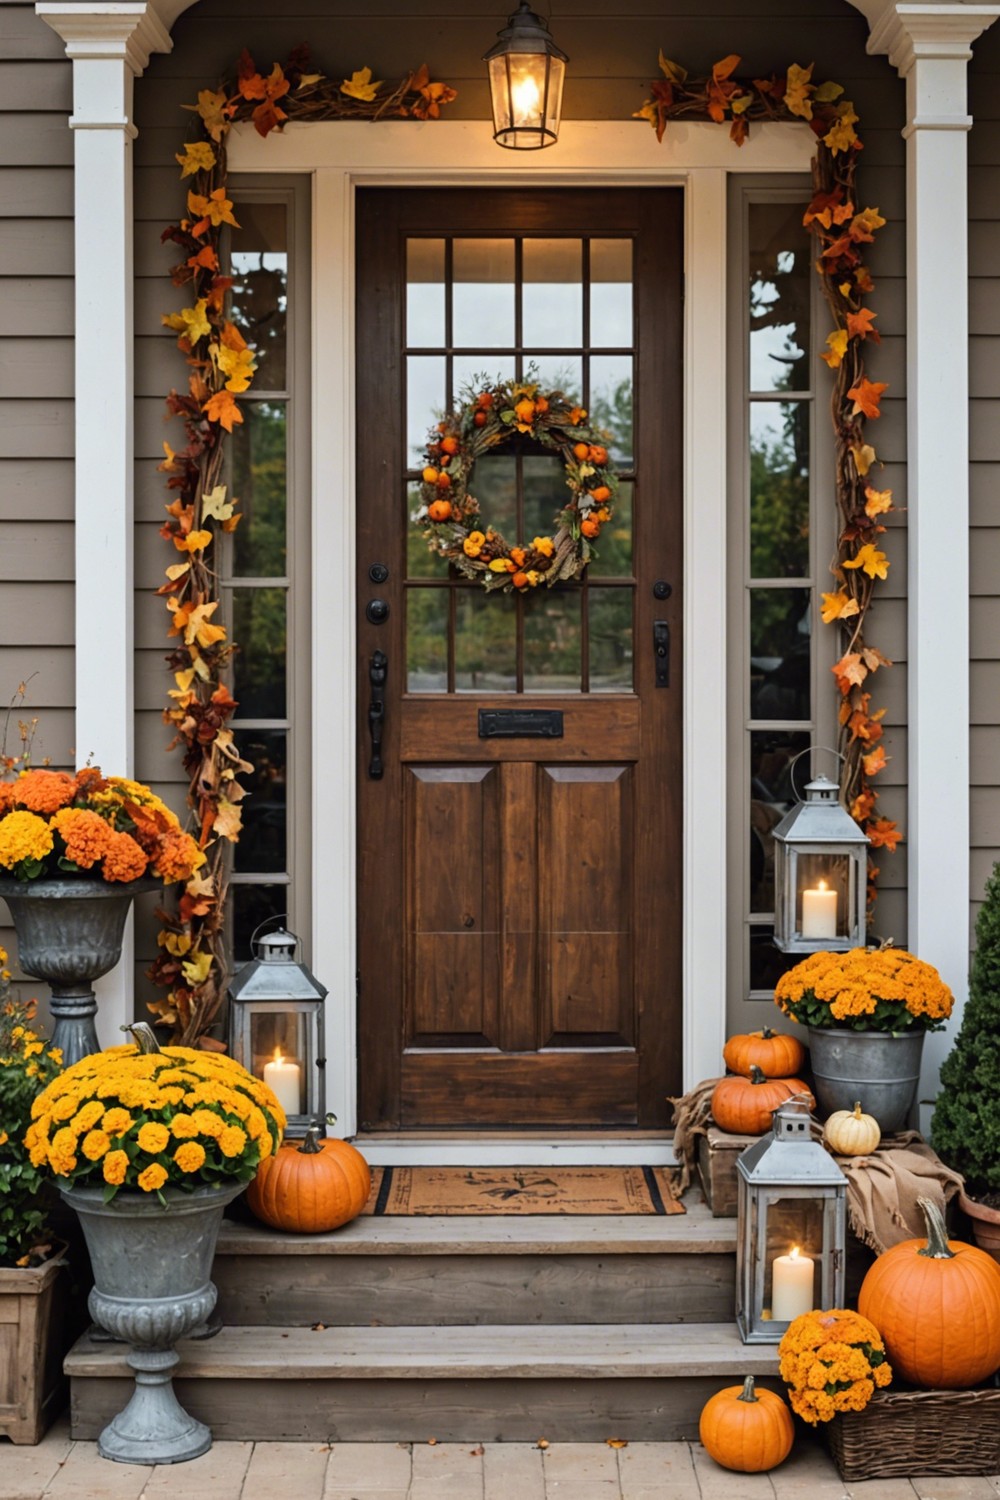 Vintage and Rustic Fall Decor